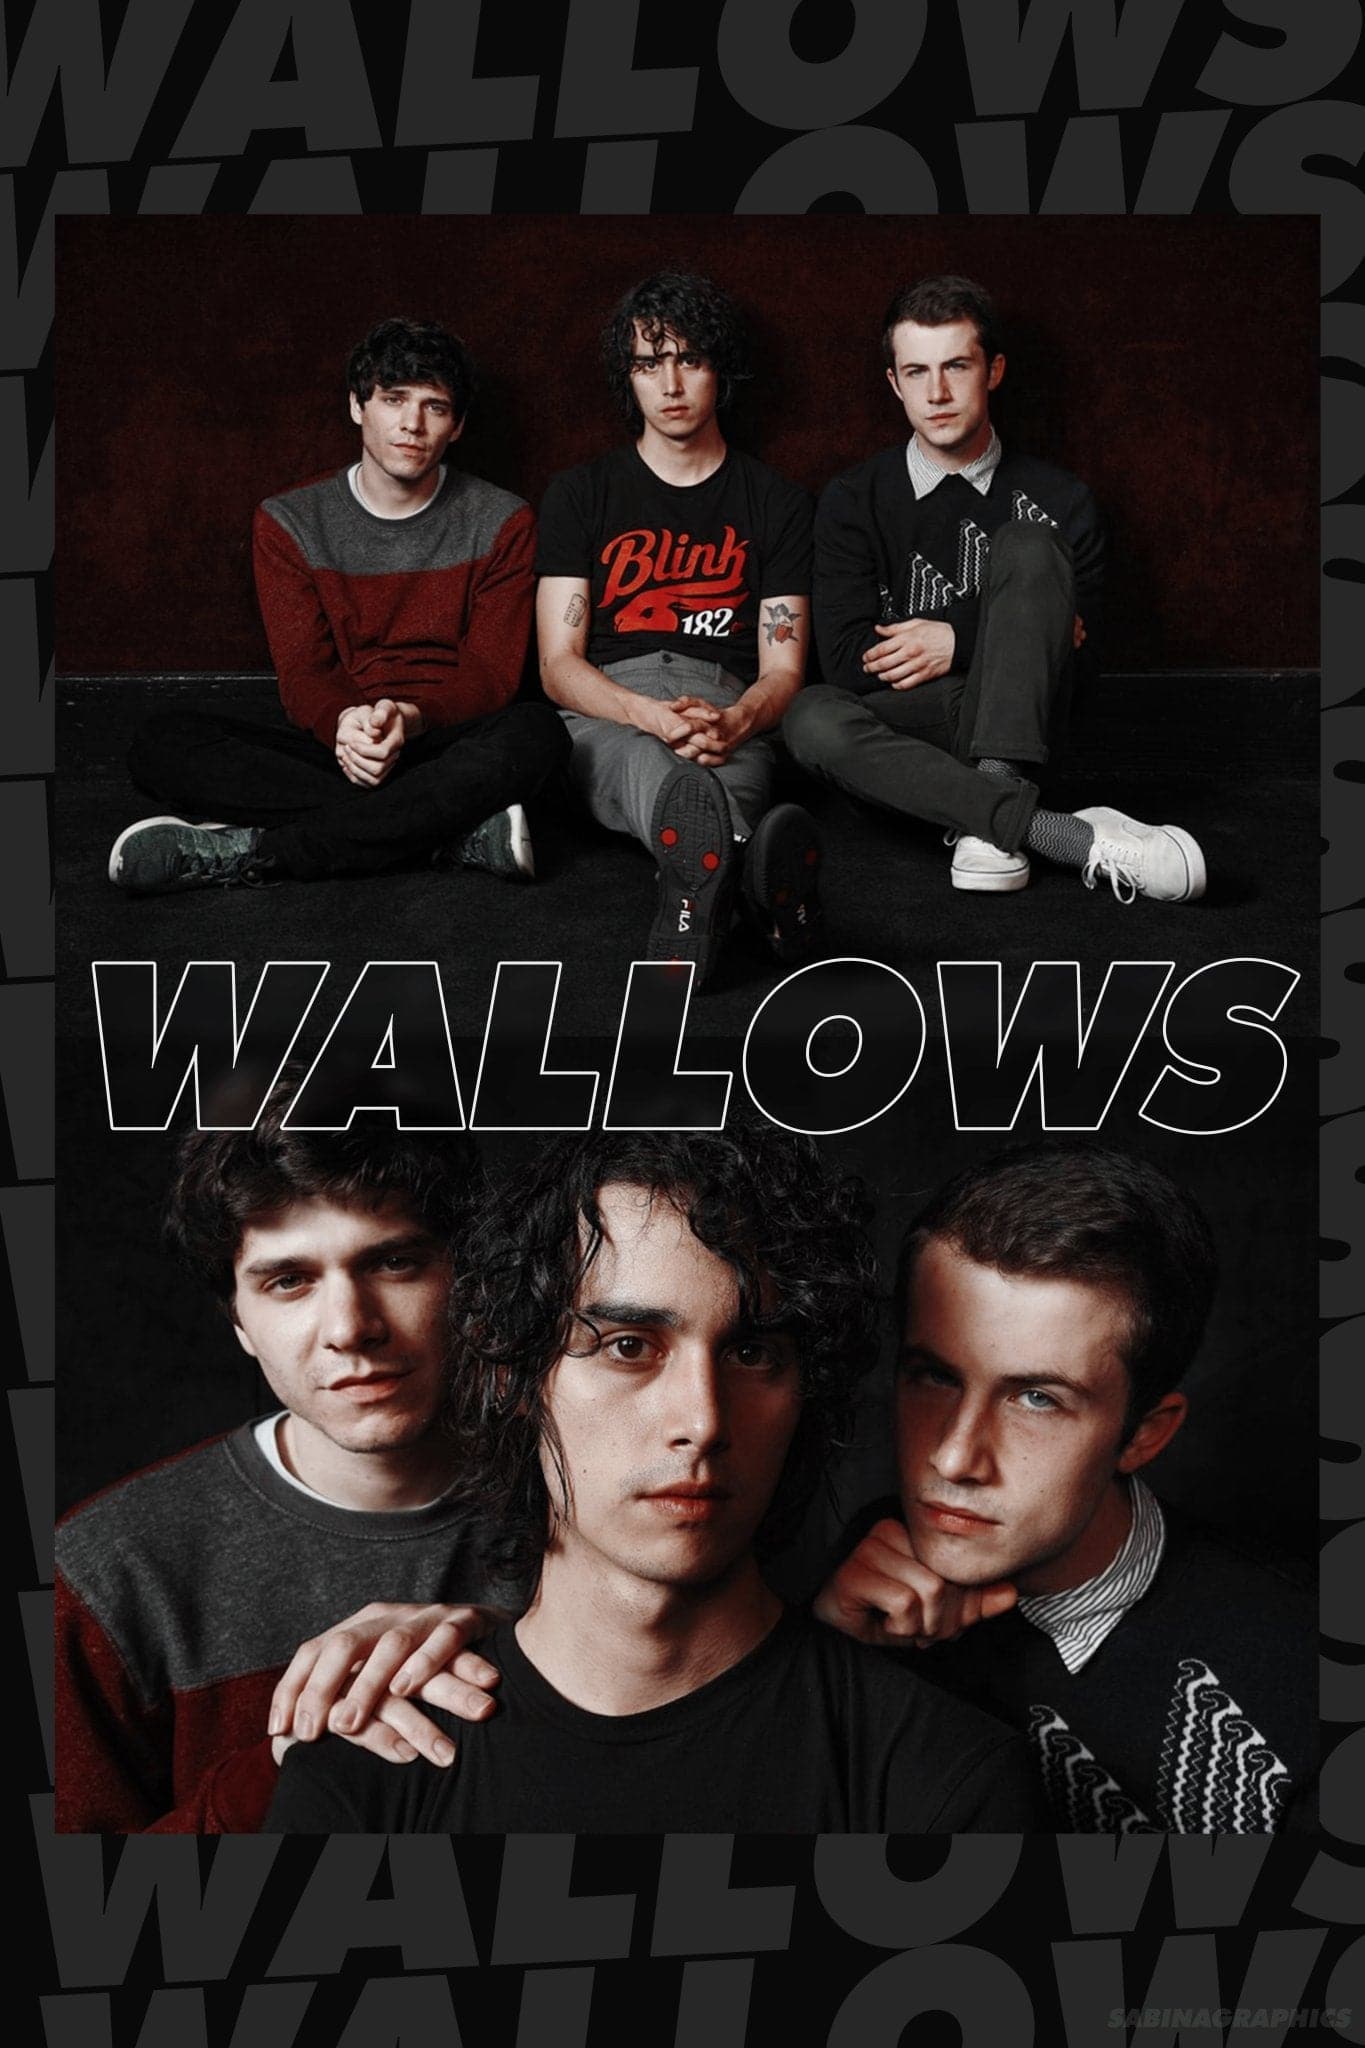 Wallows 'Trio' Poster - Posters Plug